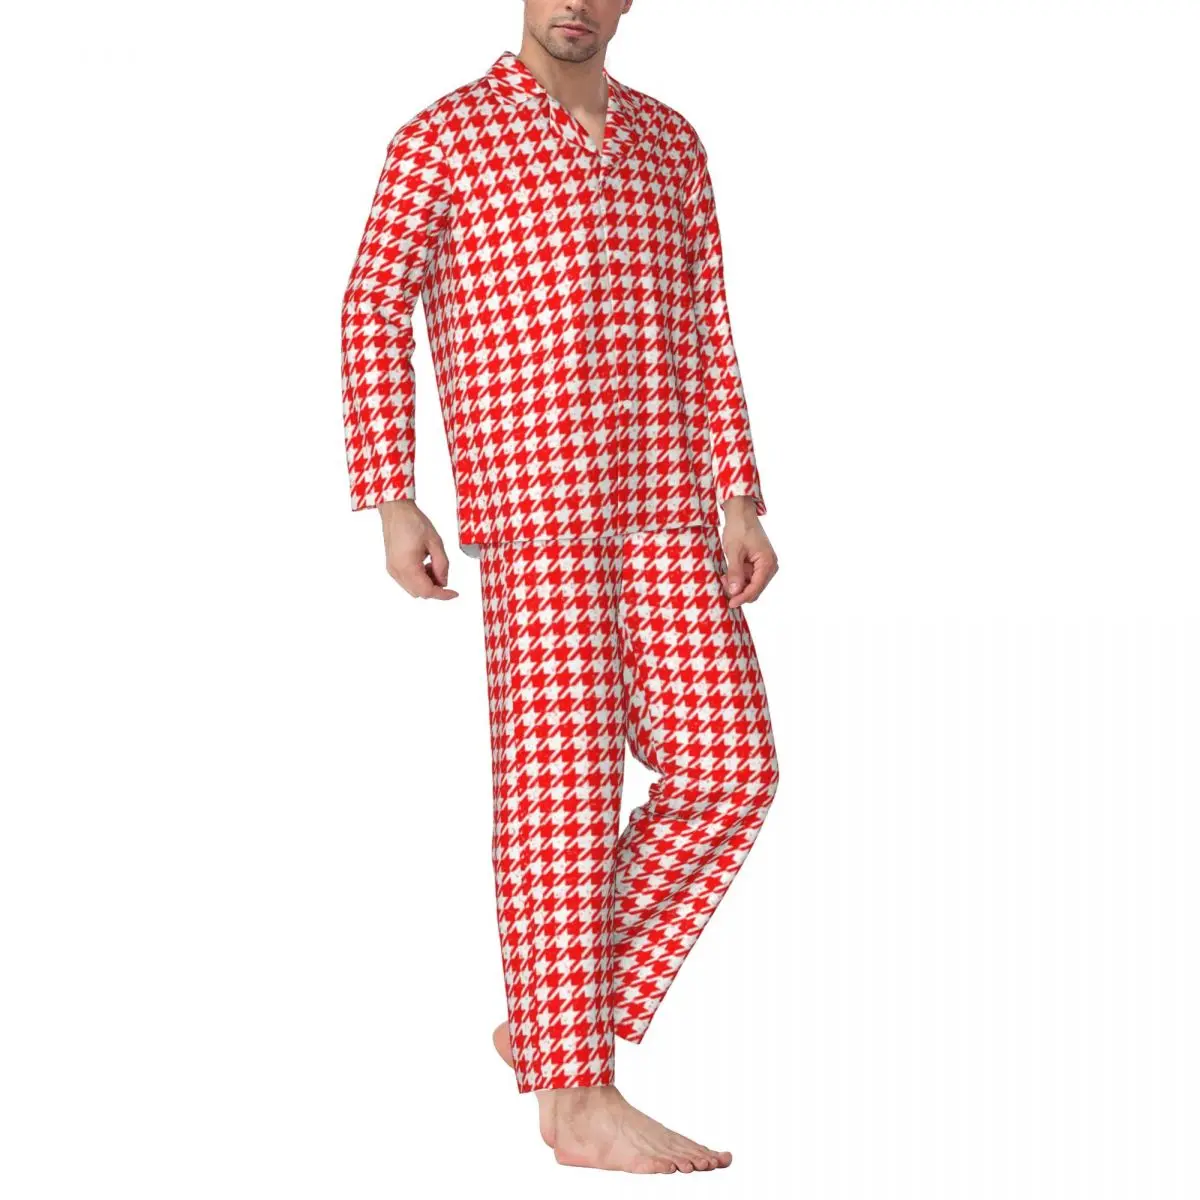 

Pajamas Male Houndstooth Speckled Night Sleepwear Red and White 2 Pieces Casual Pajama Set Long Sleeve Warm Oversized Home Suit